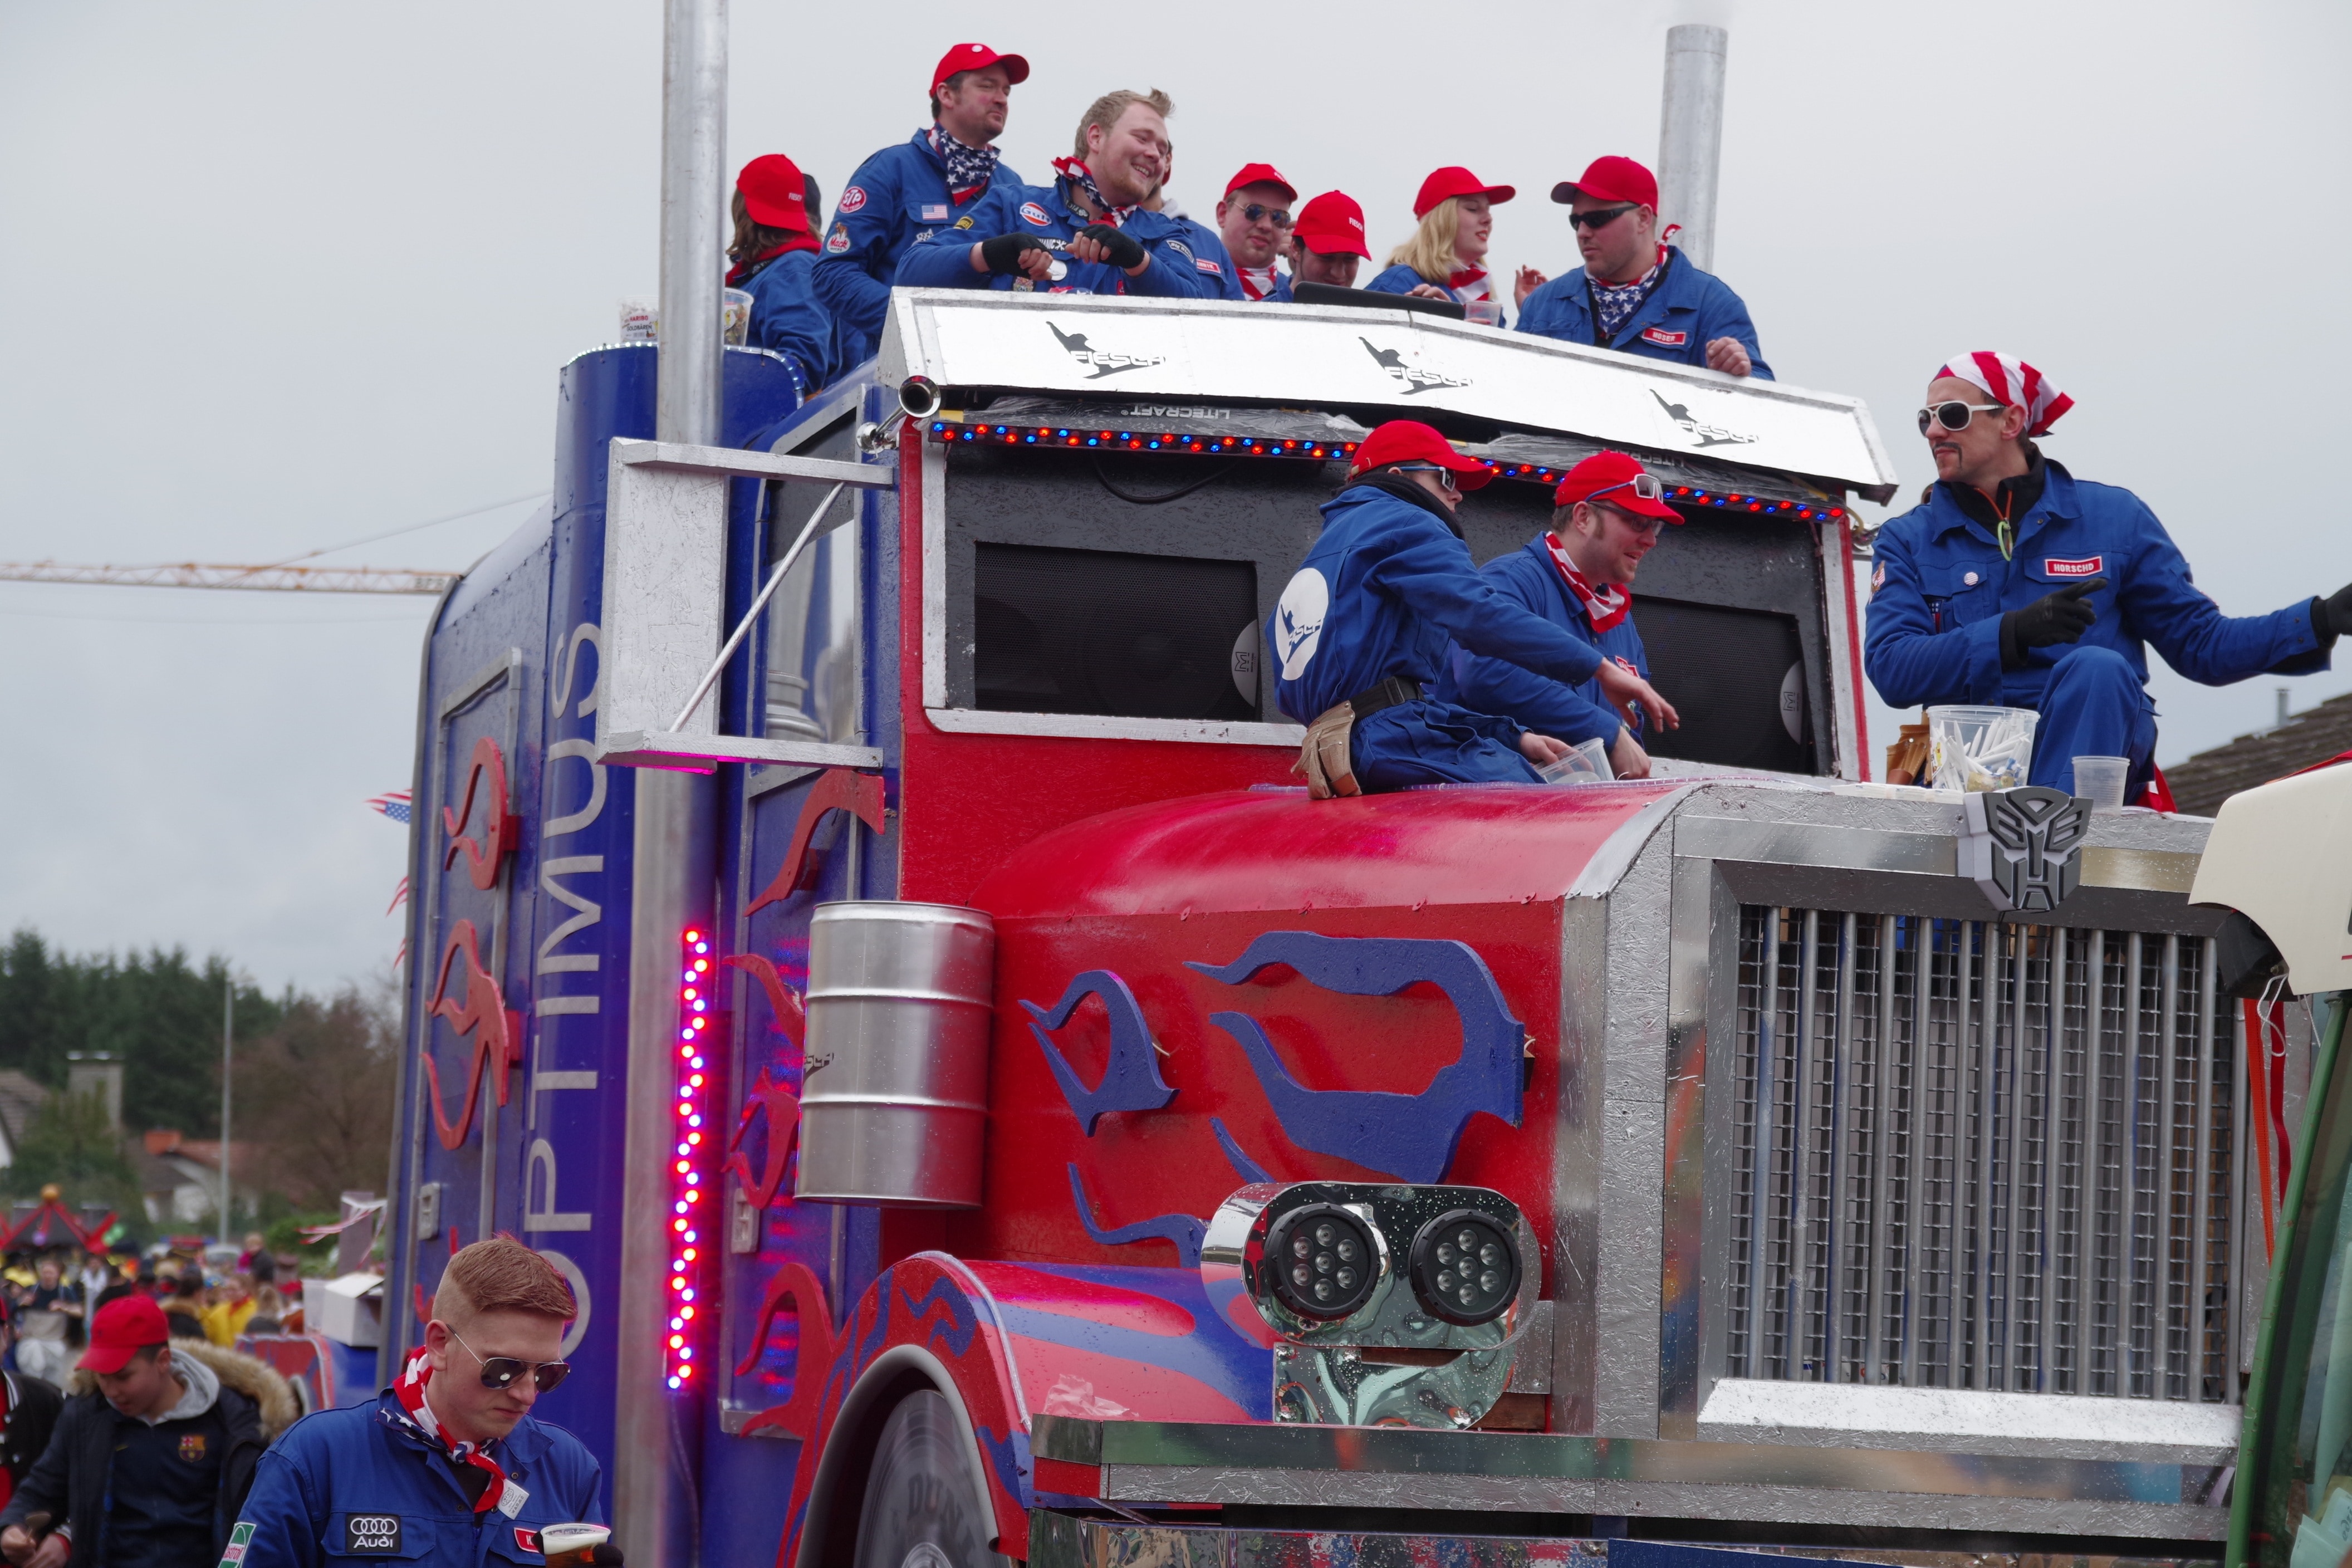 group of people riding on top of red Optimus Prime